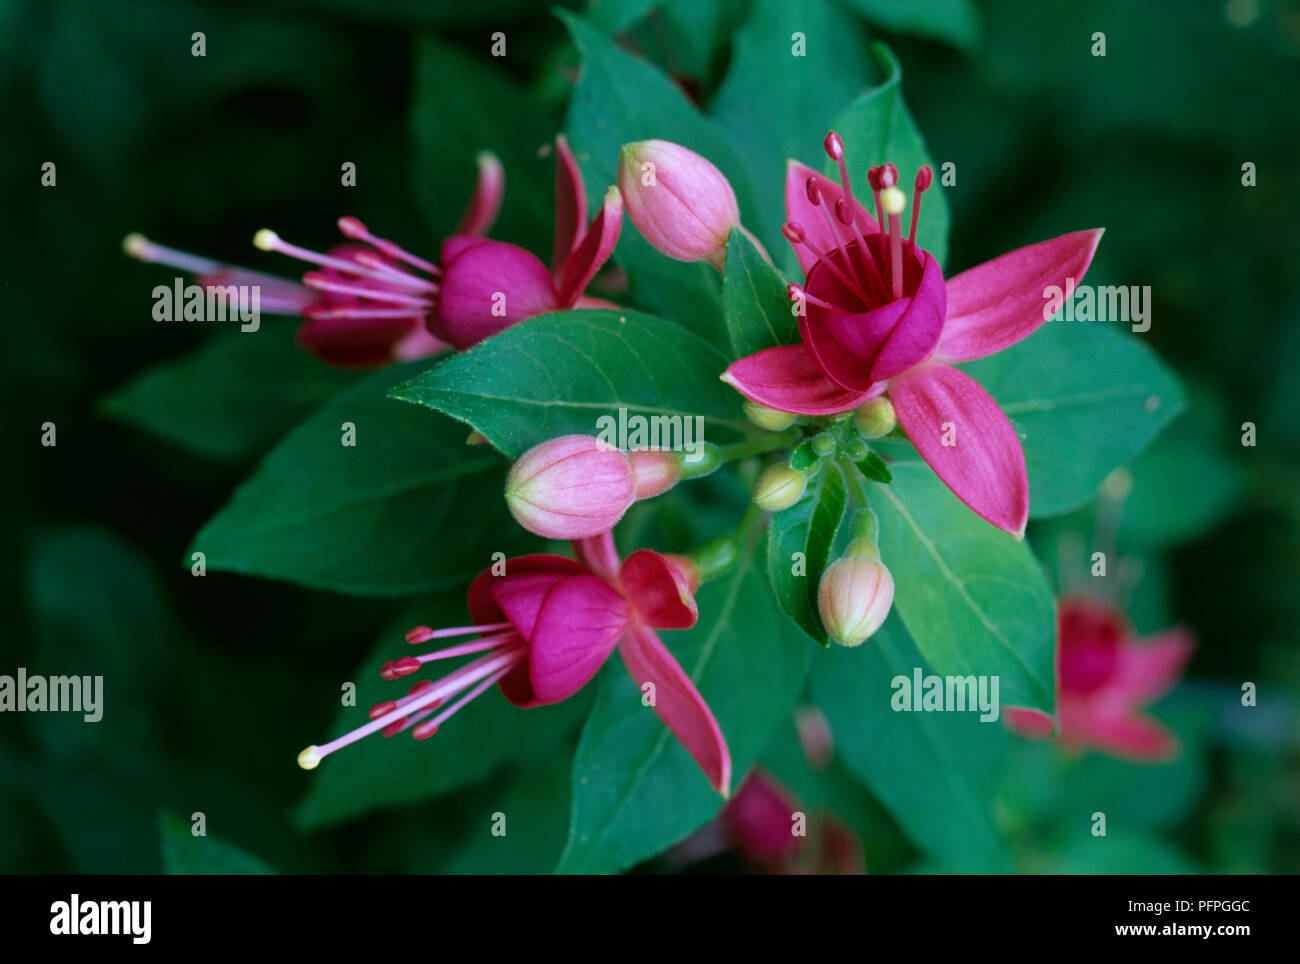 Fuchsia 'Cherry', pink flowers, unfurled buds, and green leaves, close-up Stock Photo